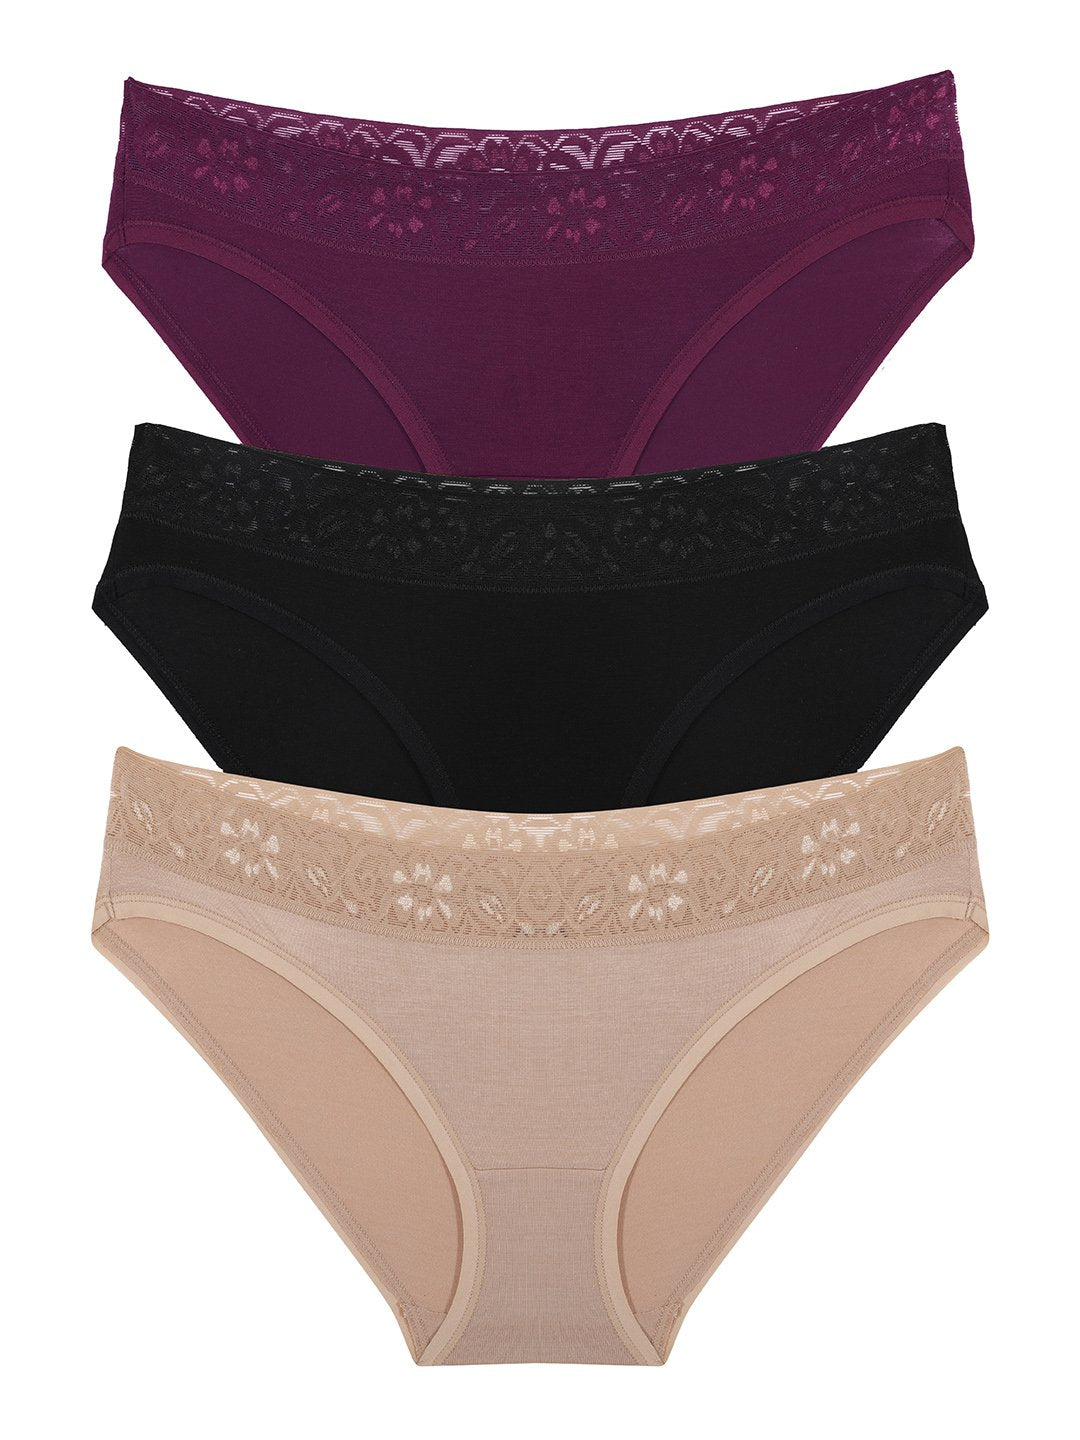 Ultimo Bikini with Lace Trim Panty Pack (Pack of 3) - Blk-Winetstng-Sndl